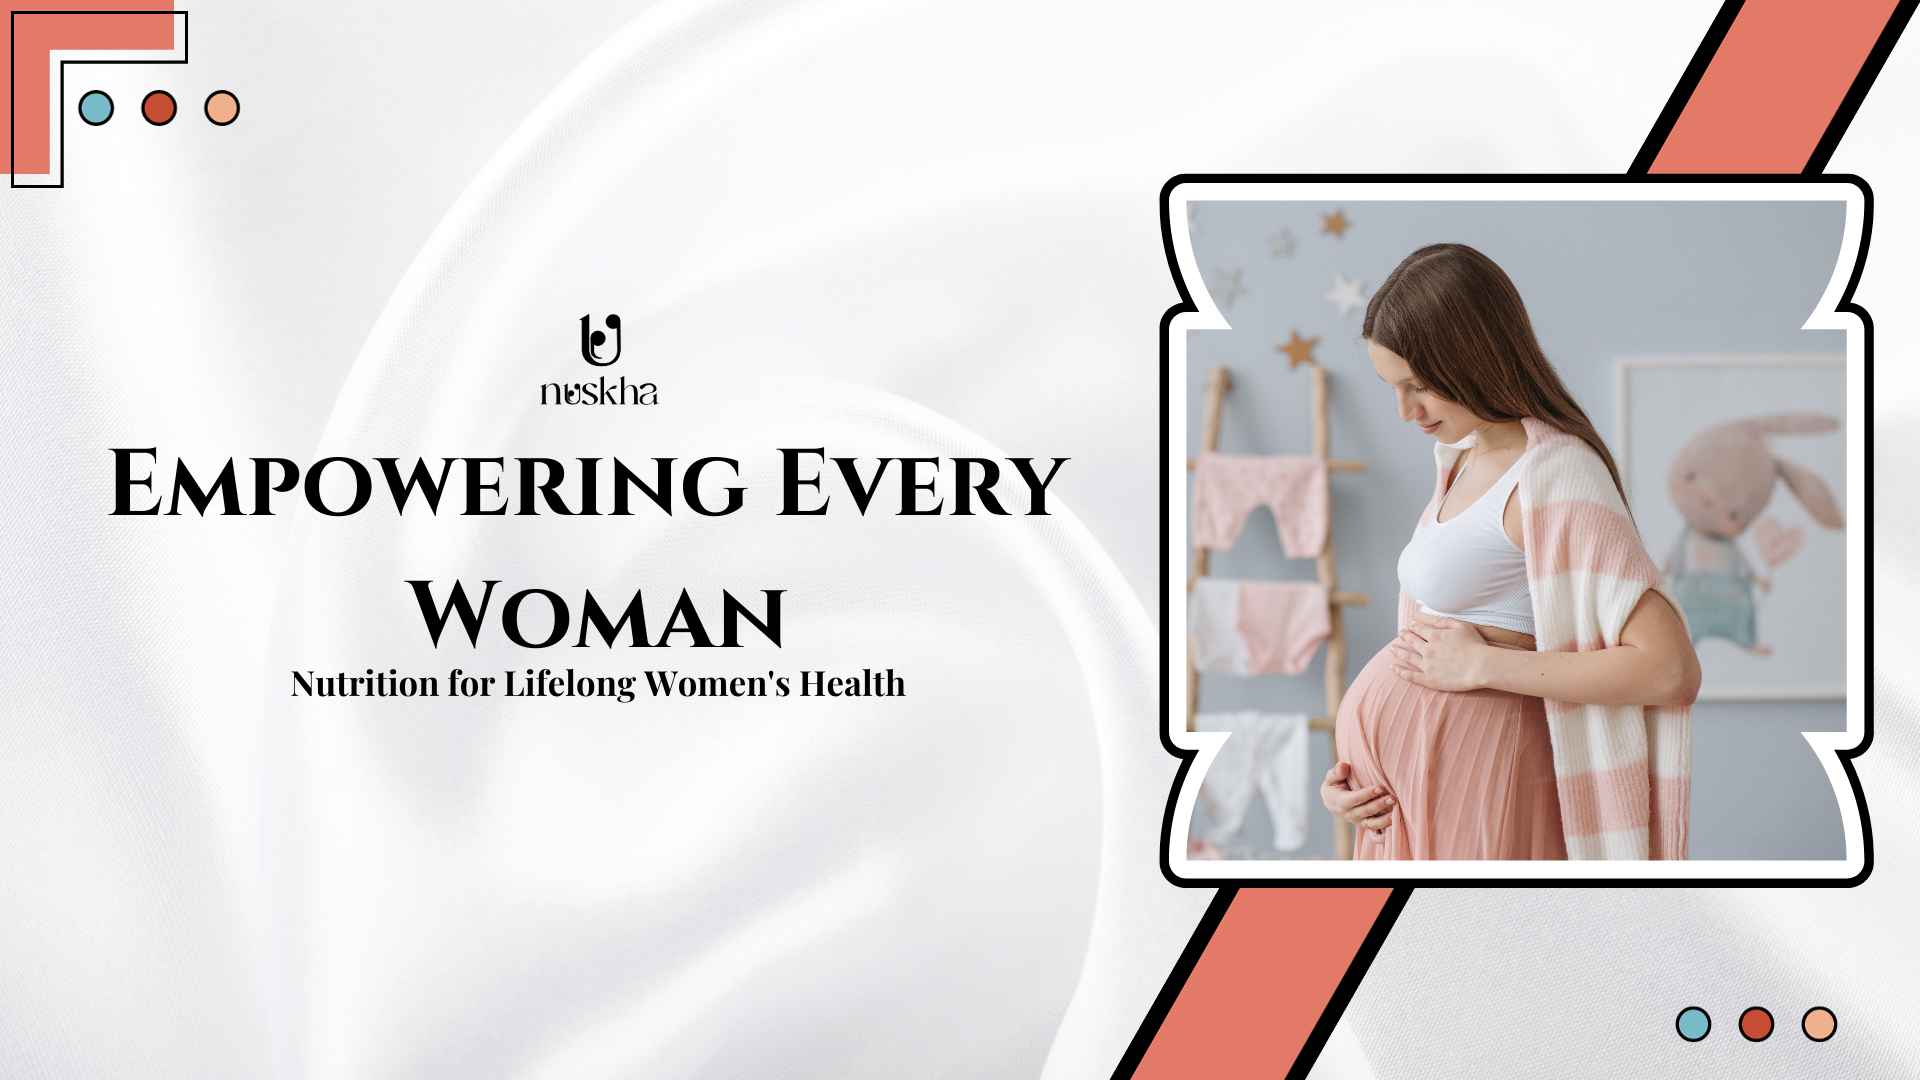 Empowering Every Woman: Nutrition for Lifelong Women's Health